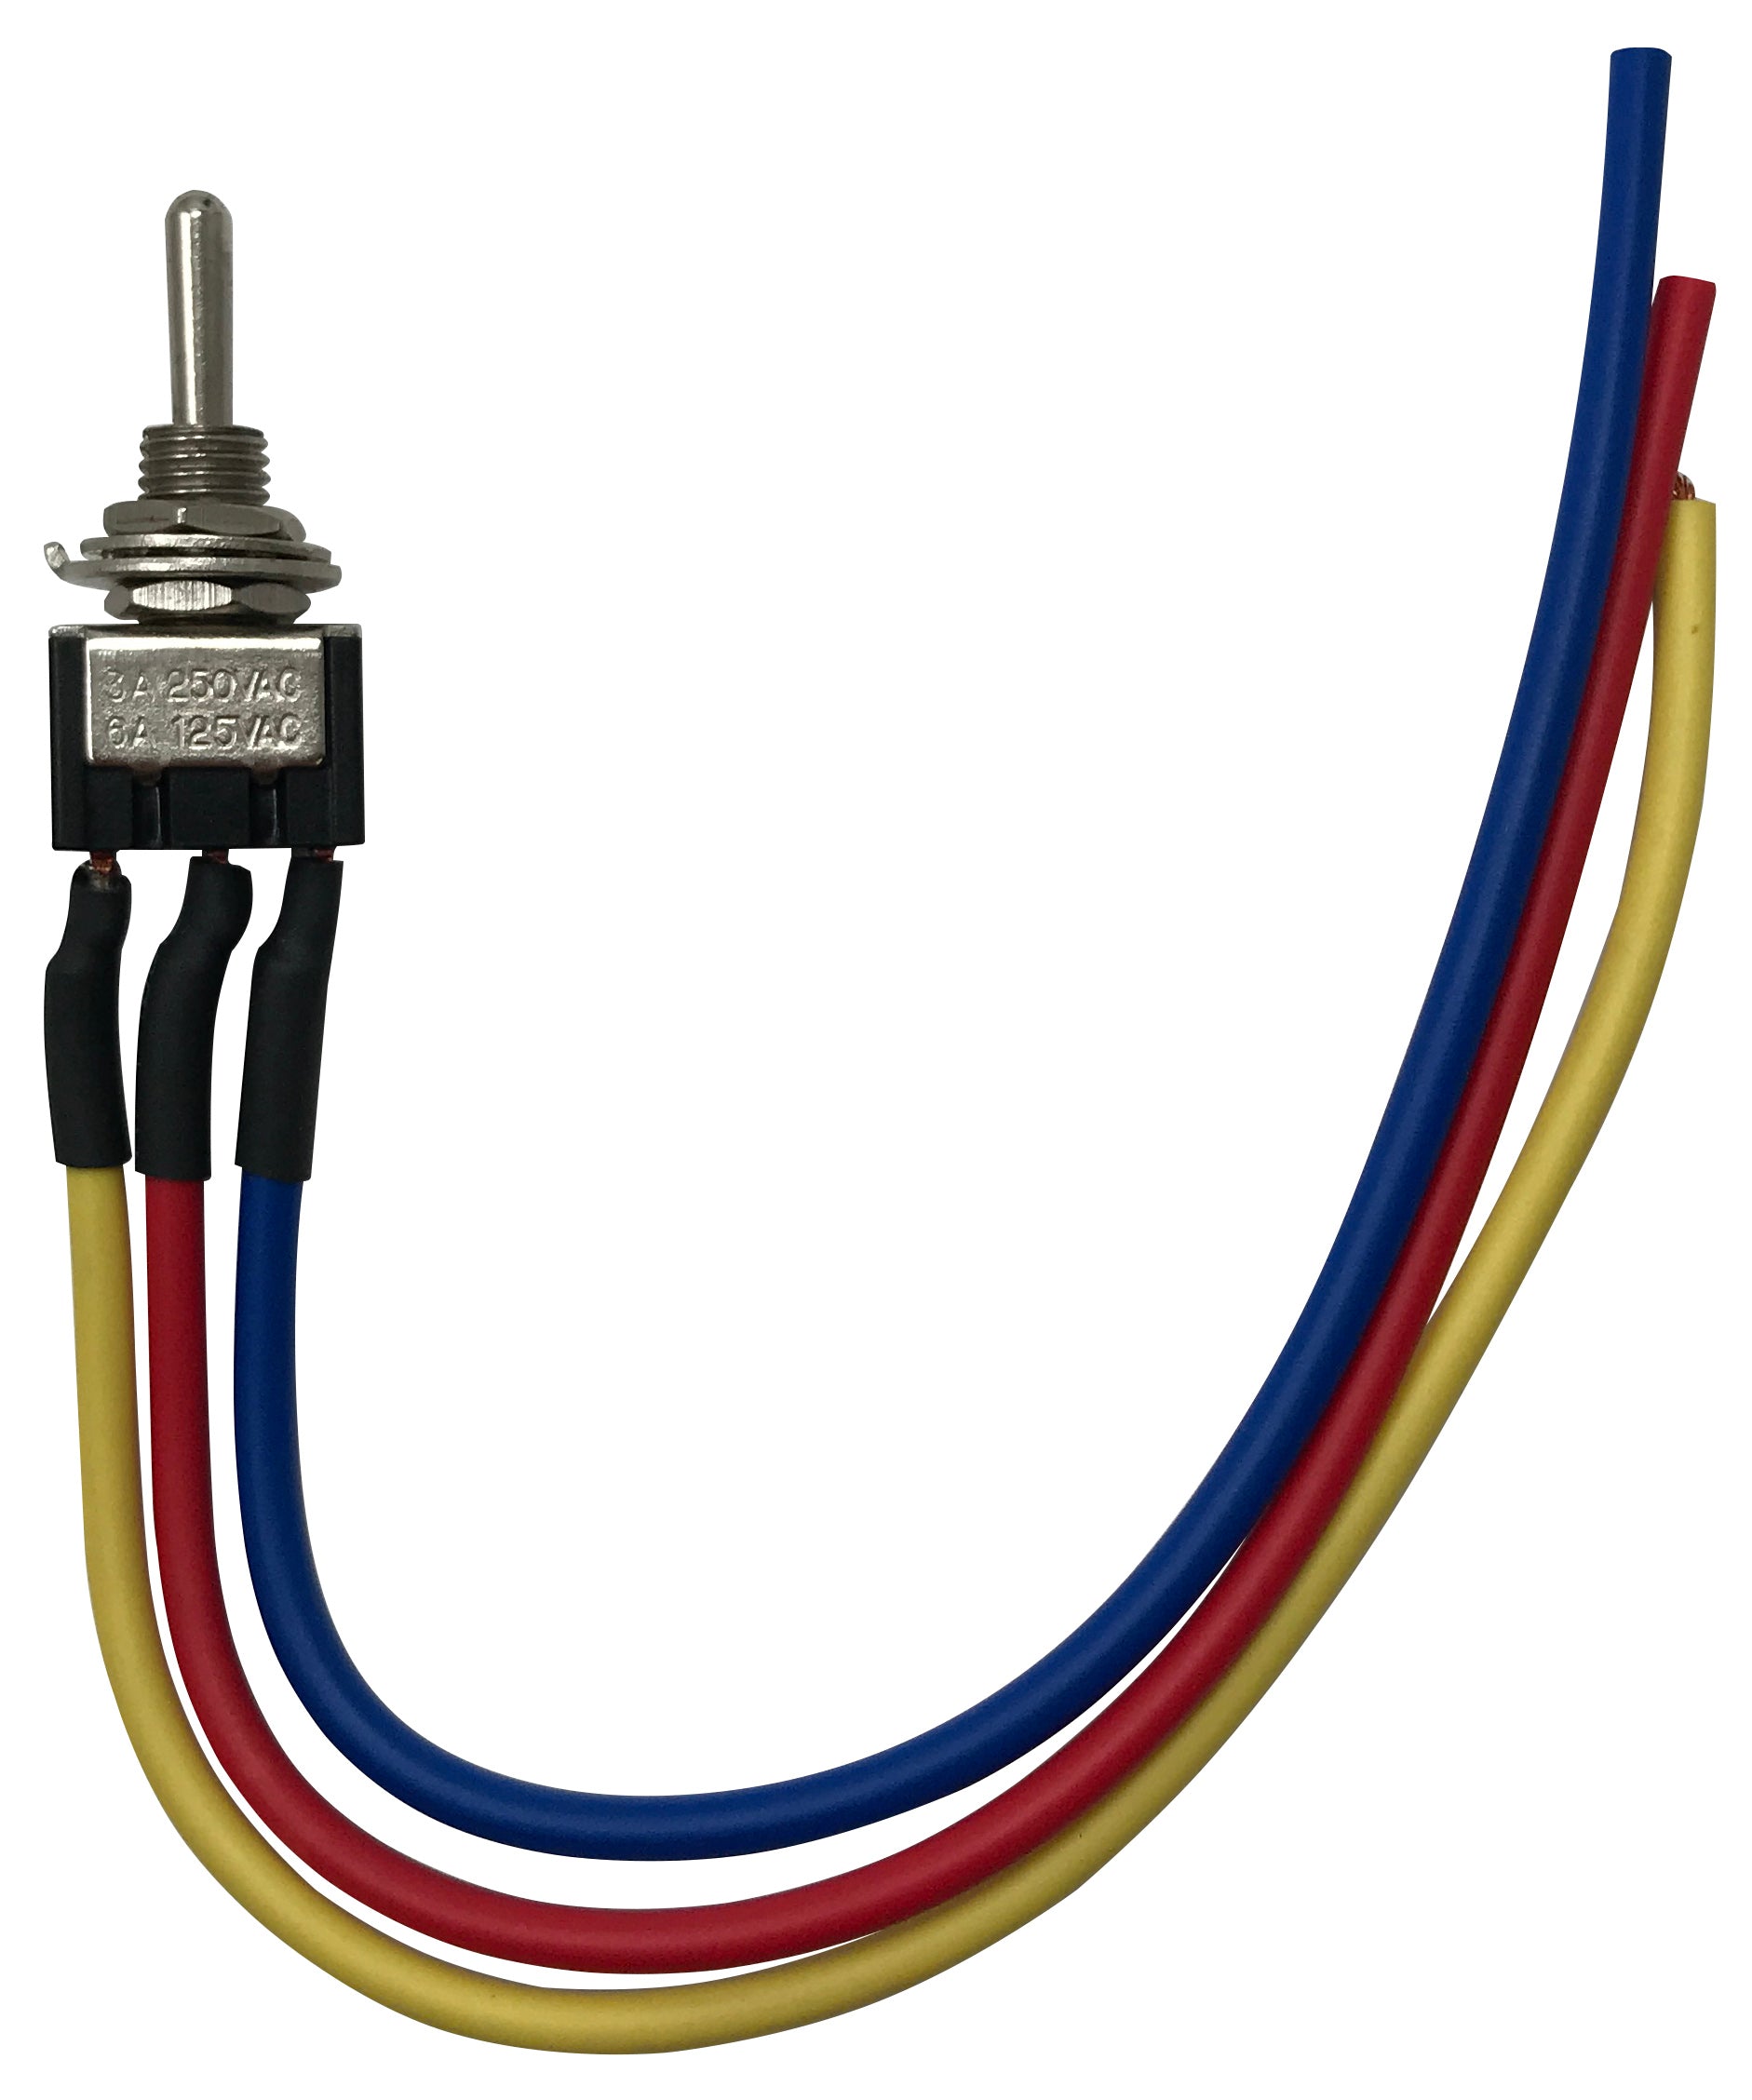 Mini Metal Toggle Switch ON-OFF-ON - 3 Amps @ 250 Volt SPDT W/ 6 Inch Leads